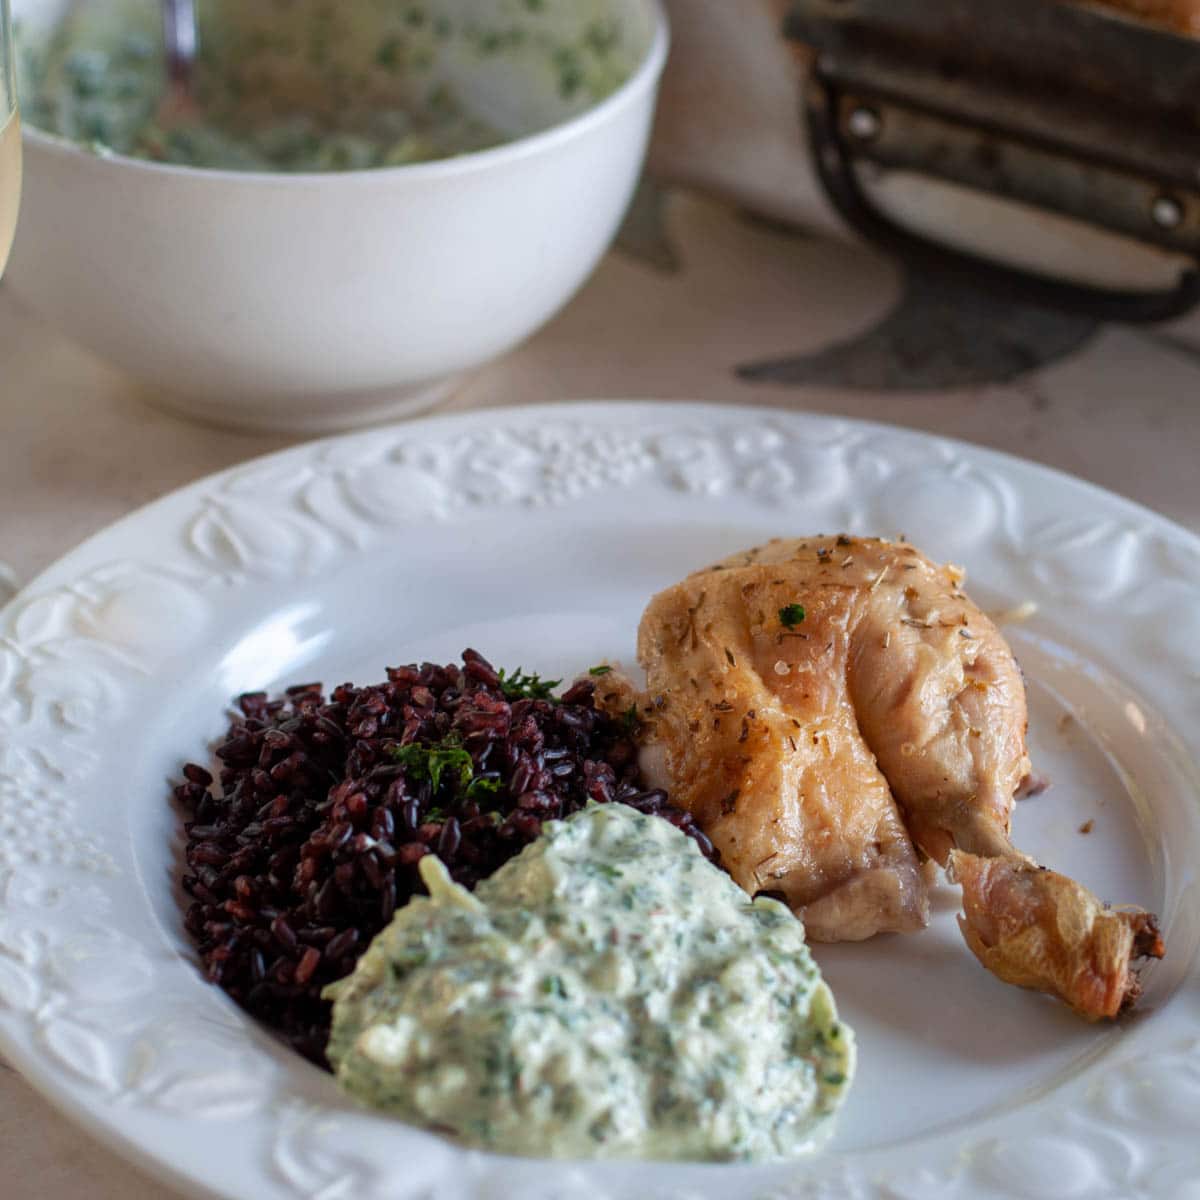 Low fat roasted chicken dinner on a plate with black rice and yogurt sauce